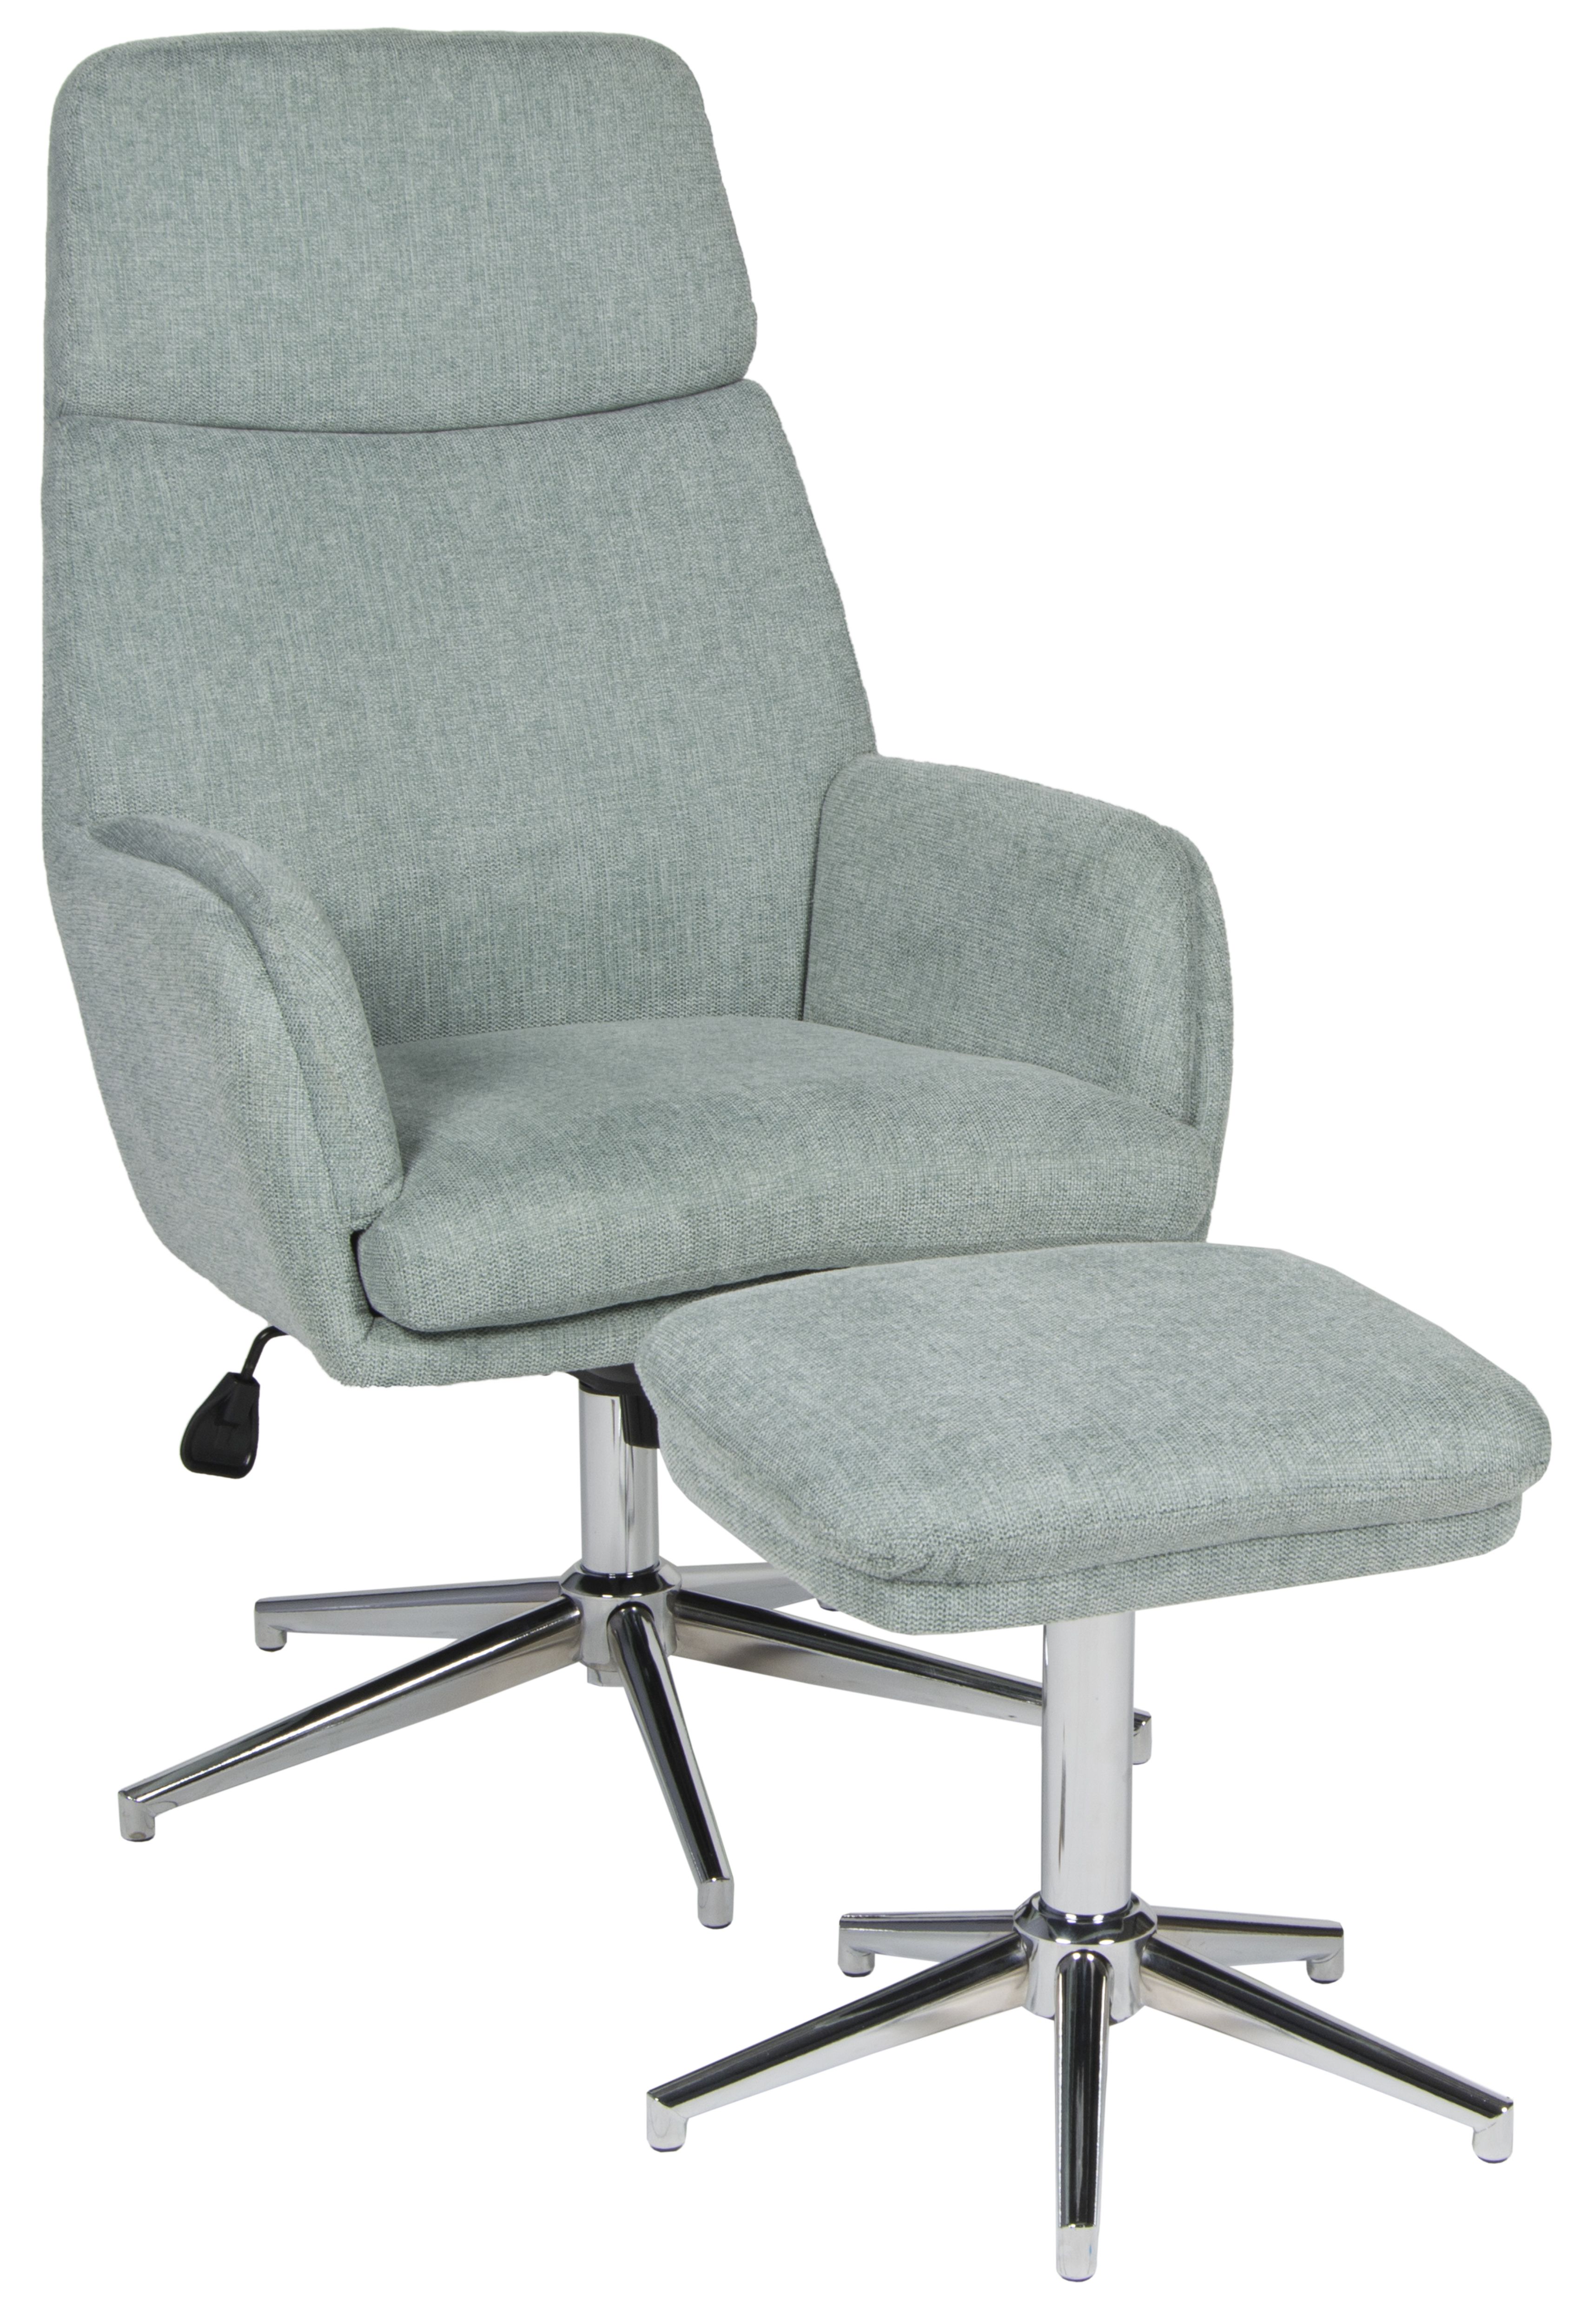 Fauteuil relax avec repose-pied WHITBY